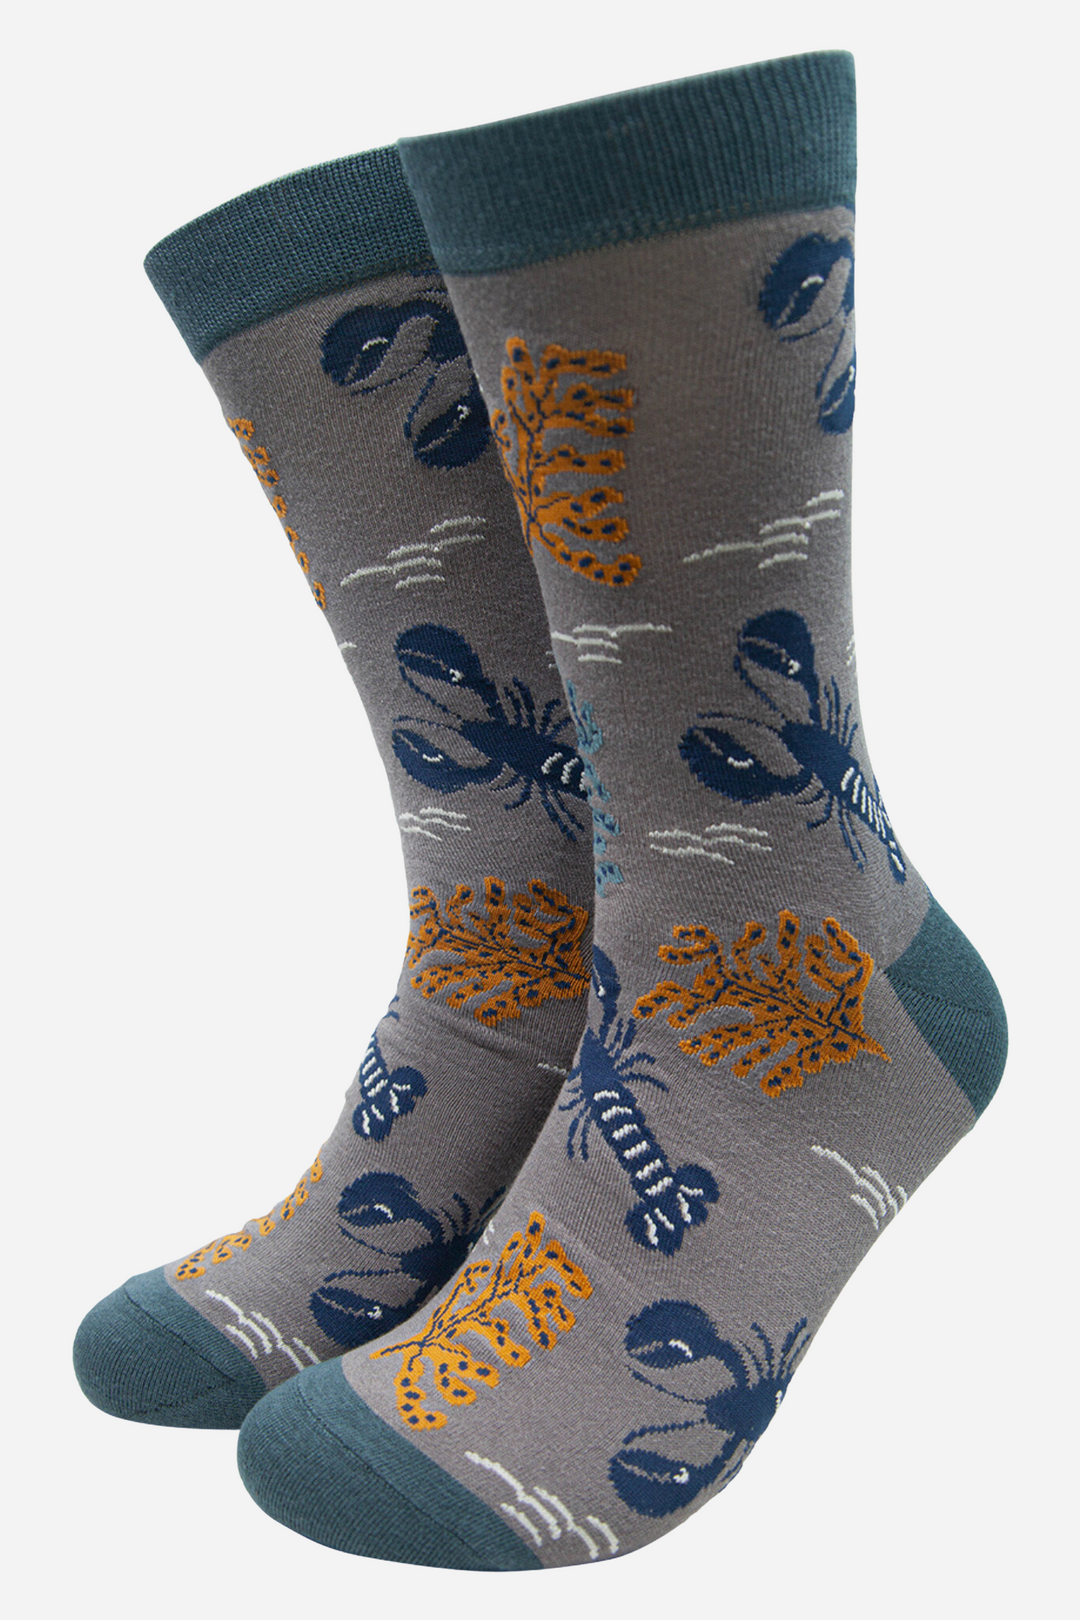 grey and blue bamboo socks with a pattern of blue lobsters and yellow marine plants